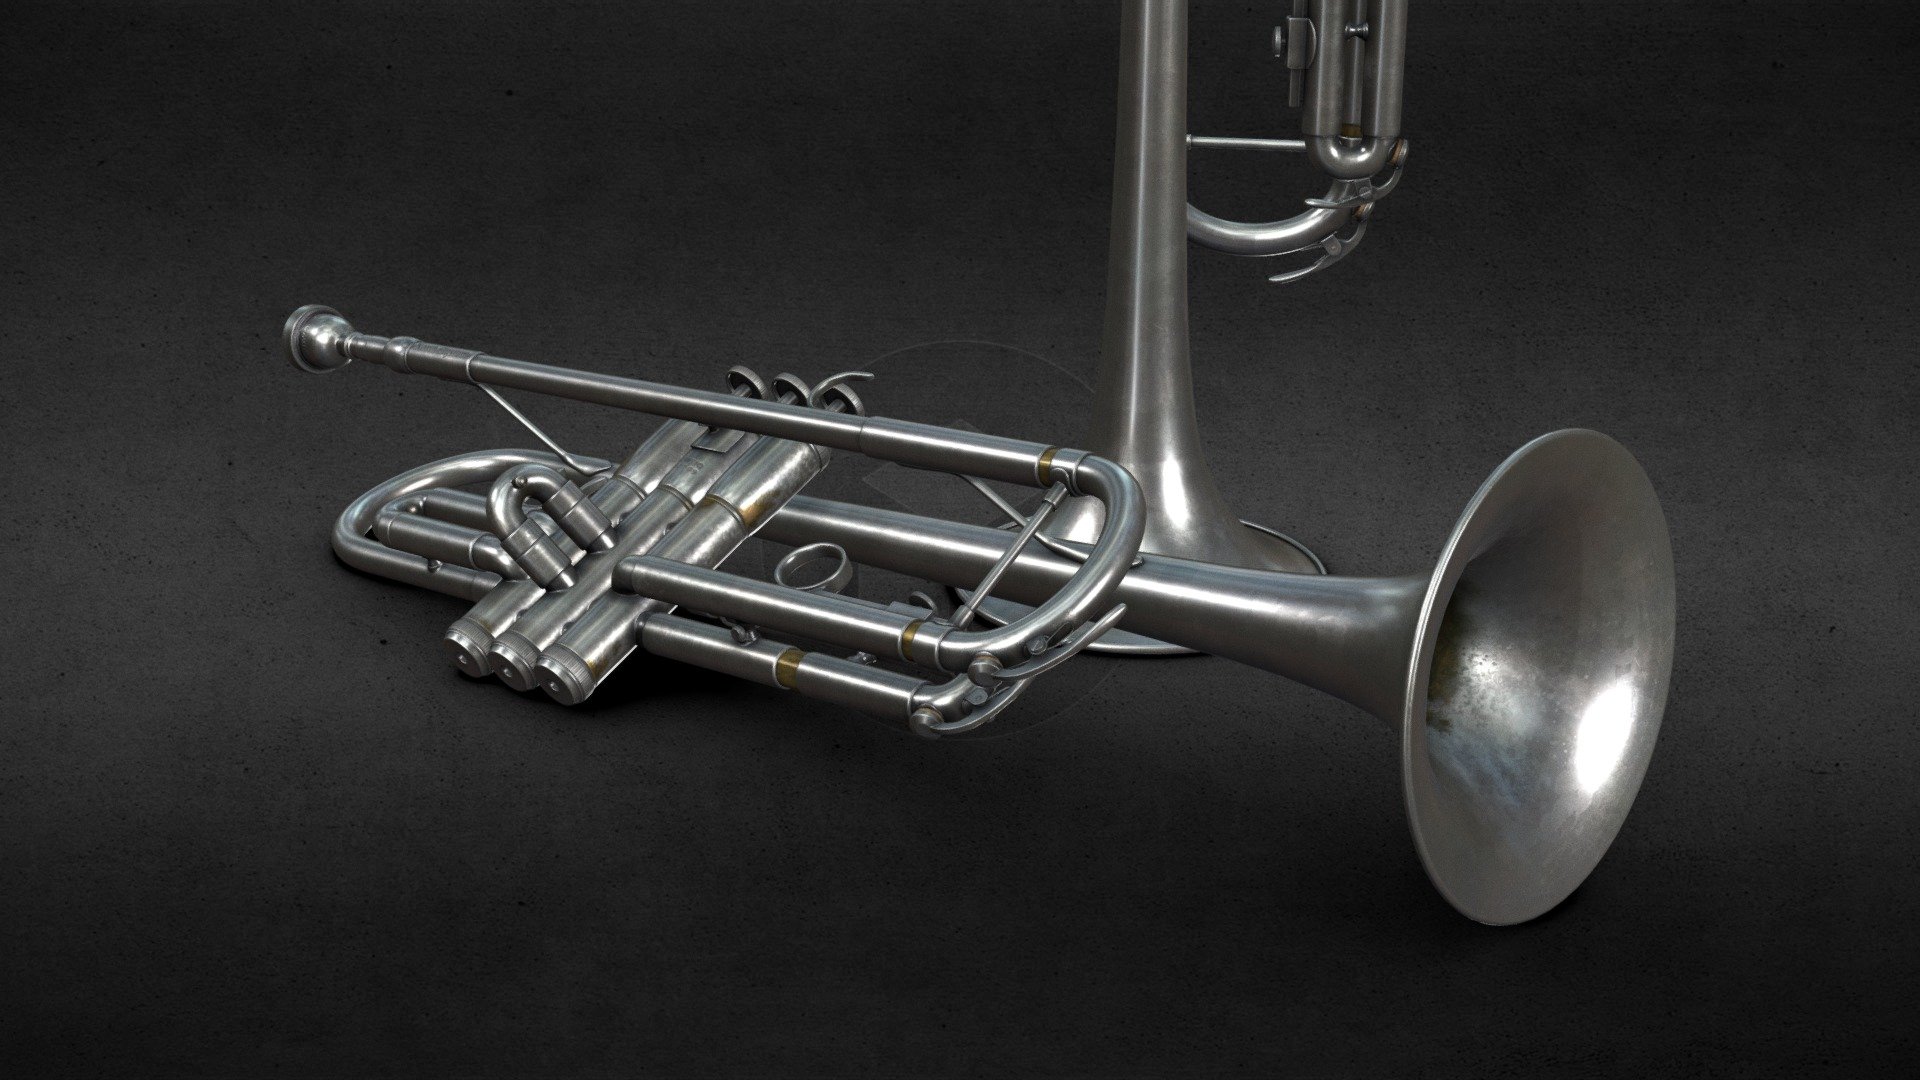 This is a wind musical instrument - a trumpet. Used for orchestral, classical, jazz and pop music 3d model